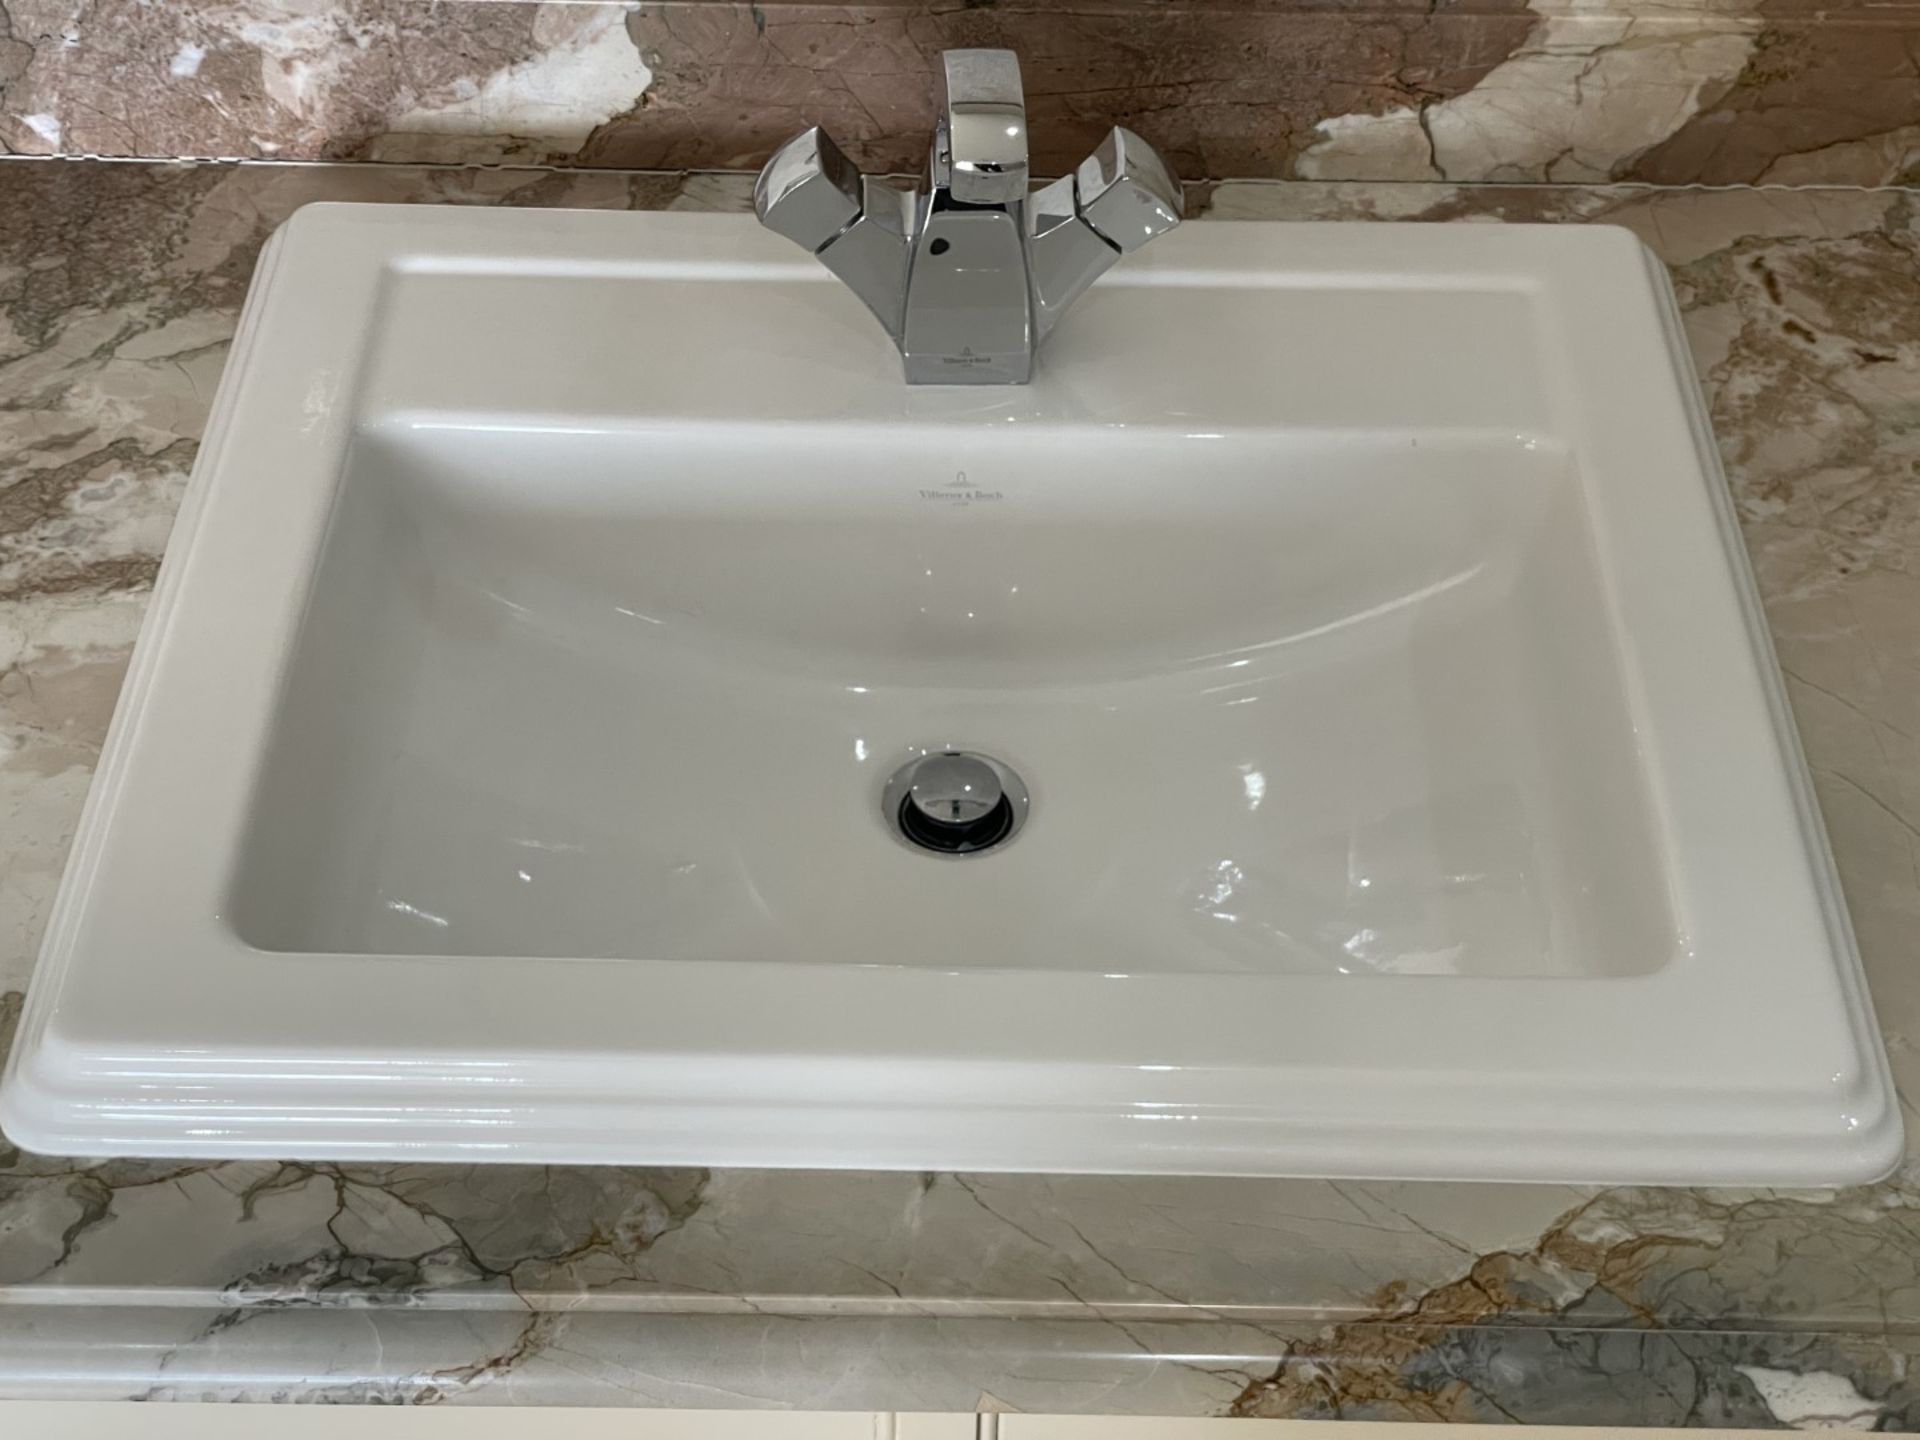 1 x Bespoke Marble-topped Solid Wood Double Vanity Unit with 2 x Villeroy & Boch Basins + Taps - Image 2 of 33